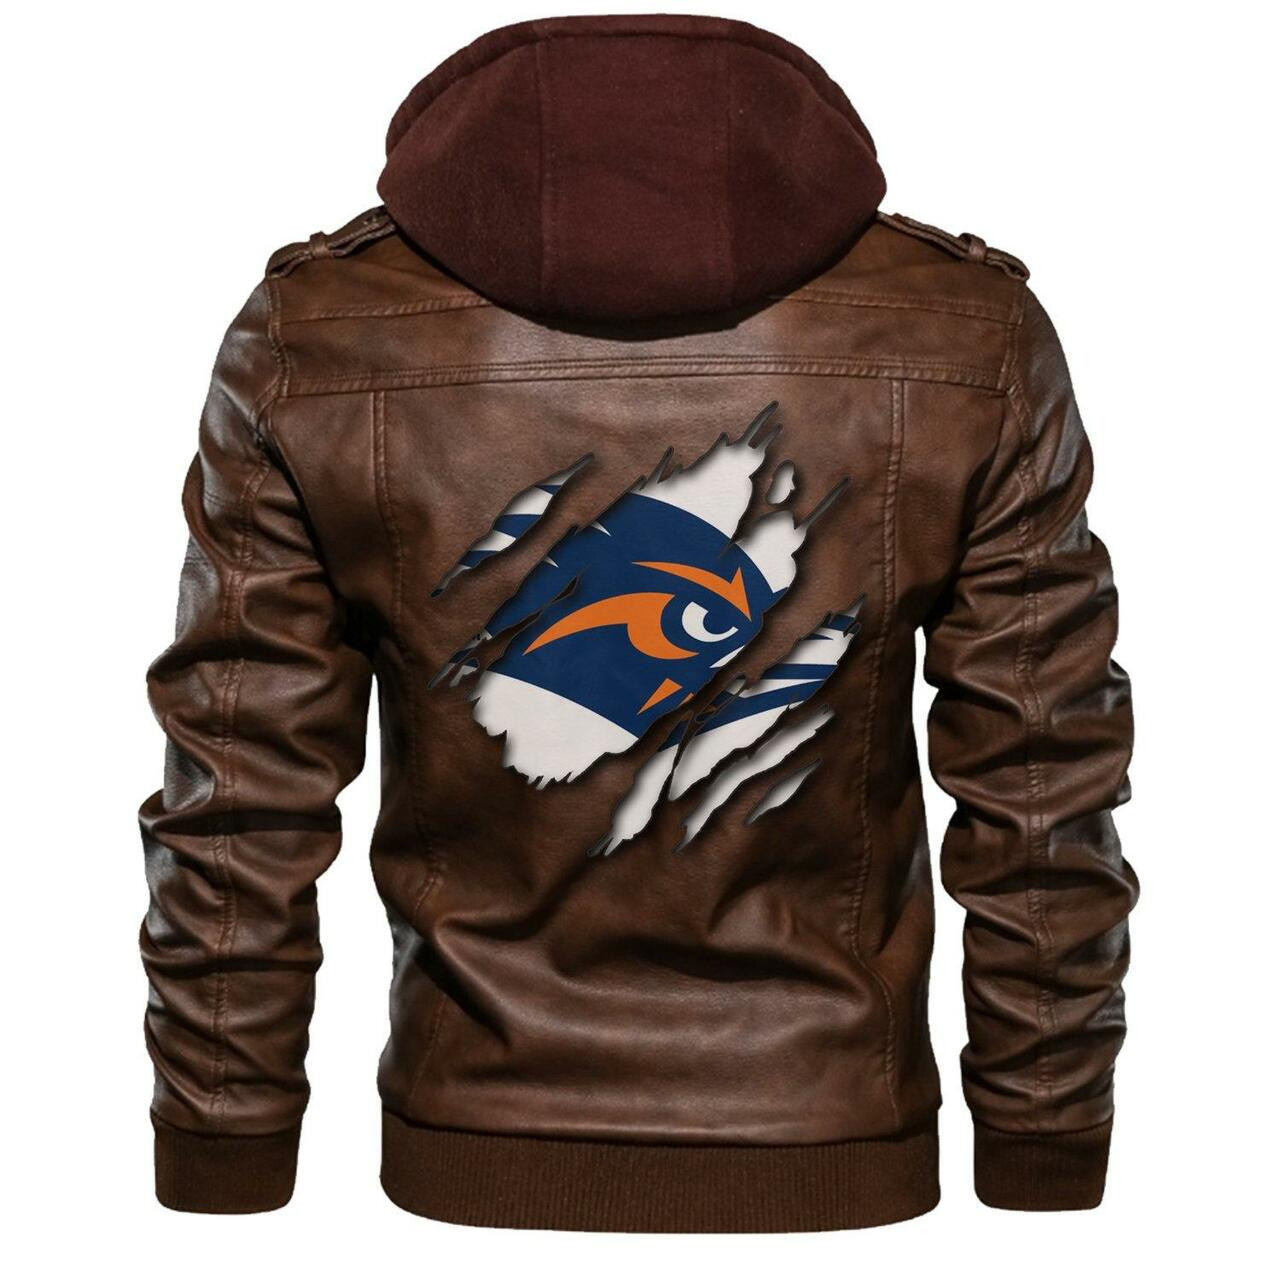 Check out and find the right leather jacket below 61